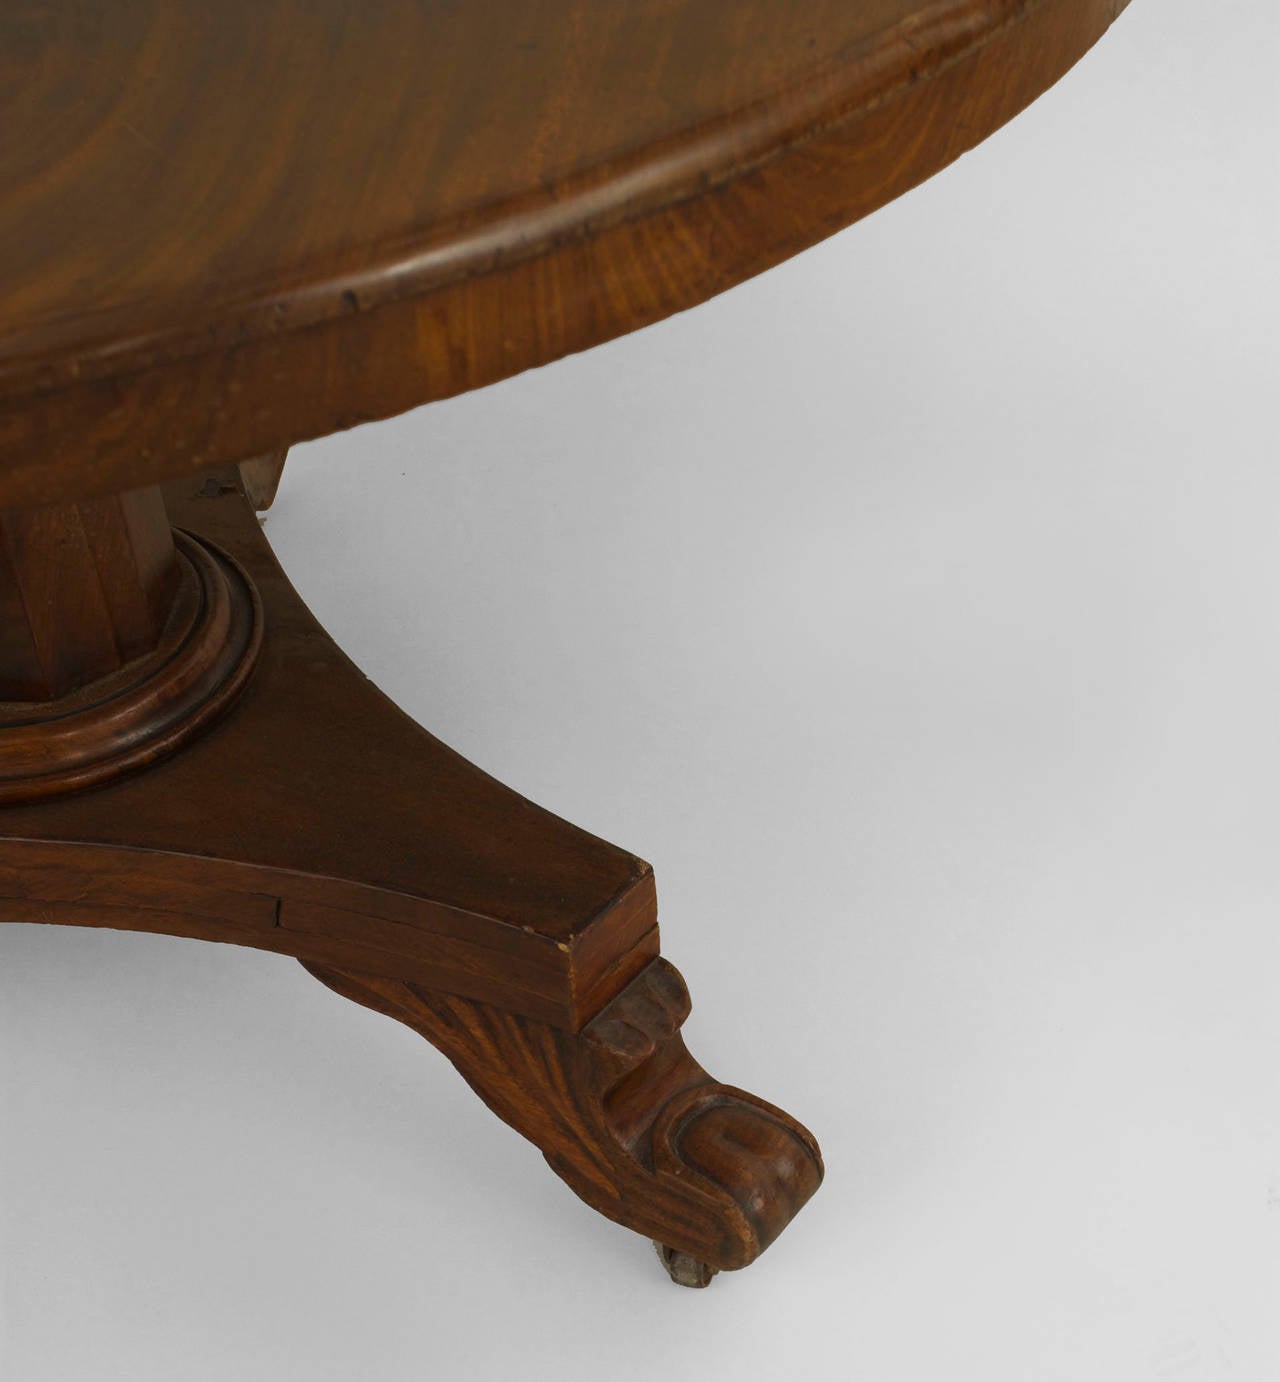 English Regency mahogany center table the book-matched top with short apron
supported by a central column all on a tripartite base with claw feet.